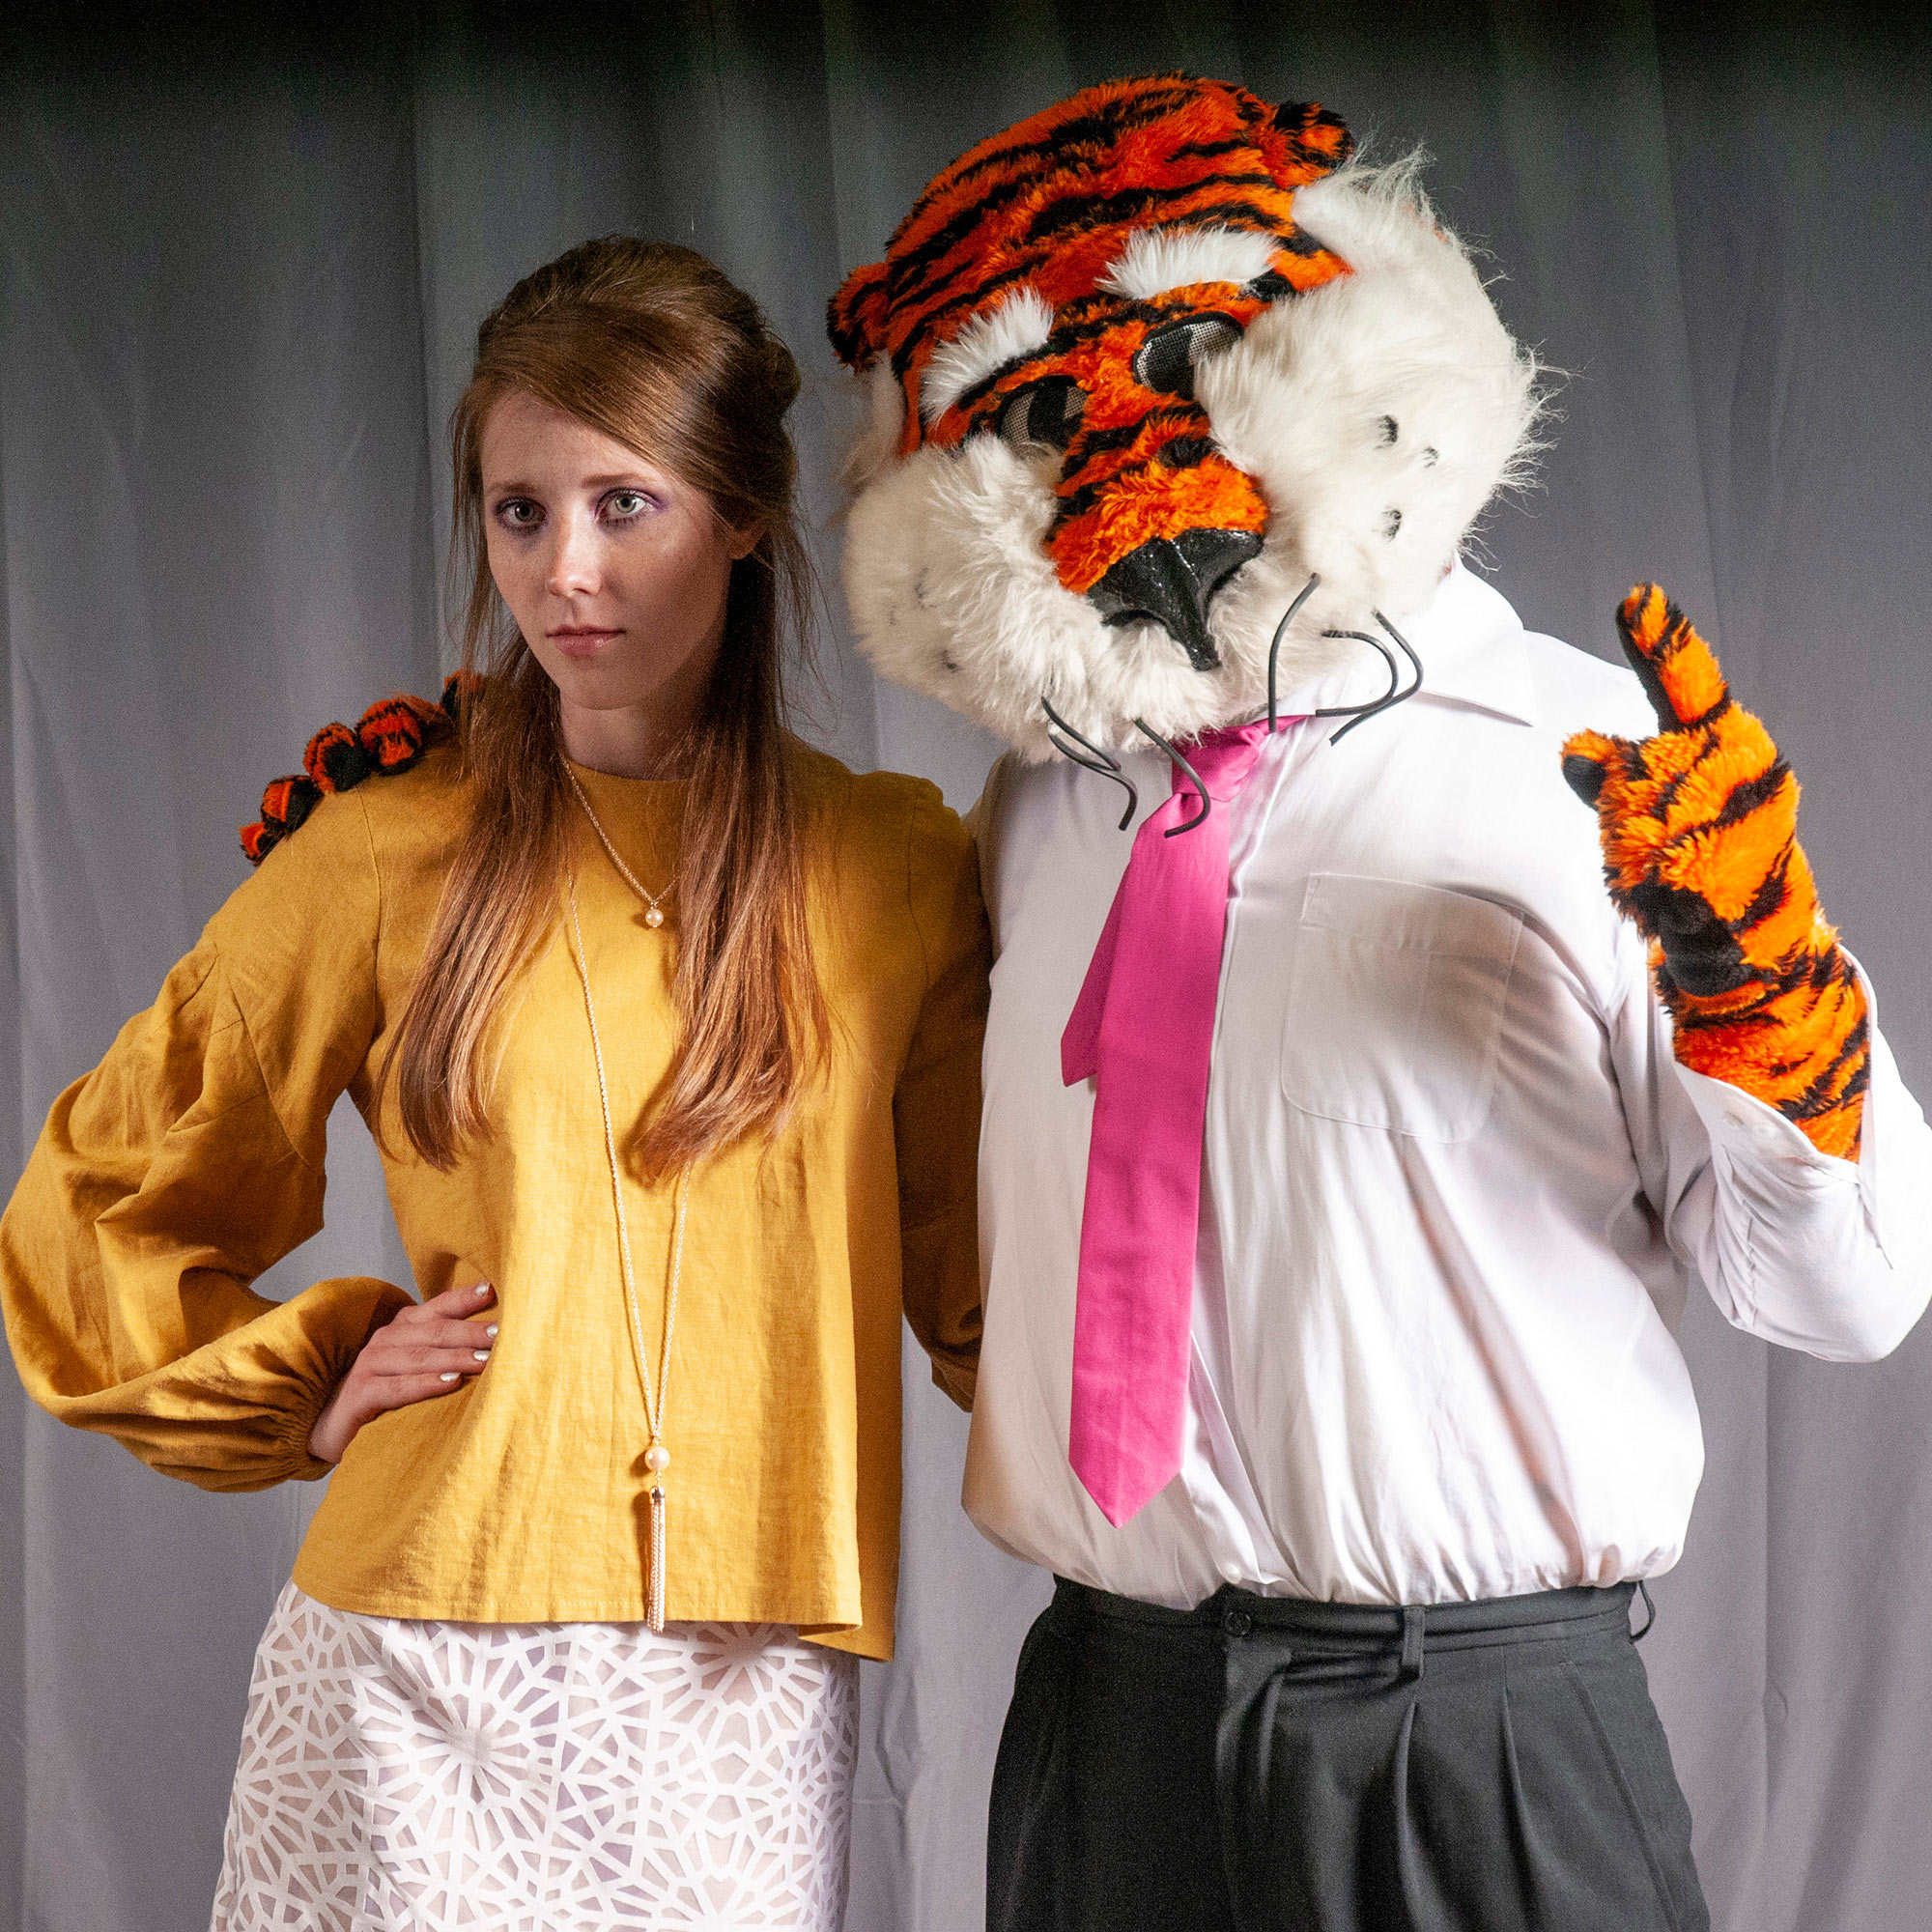 Model at the backstage photo screen with Aubie.